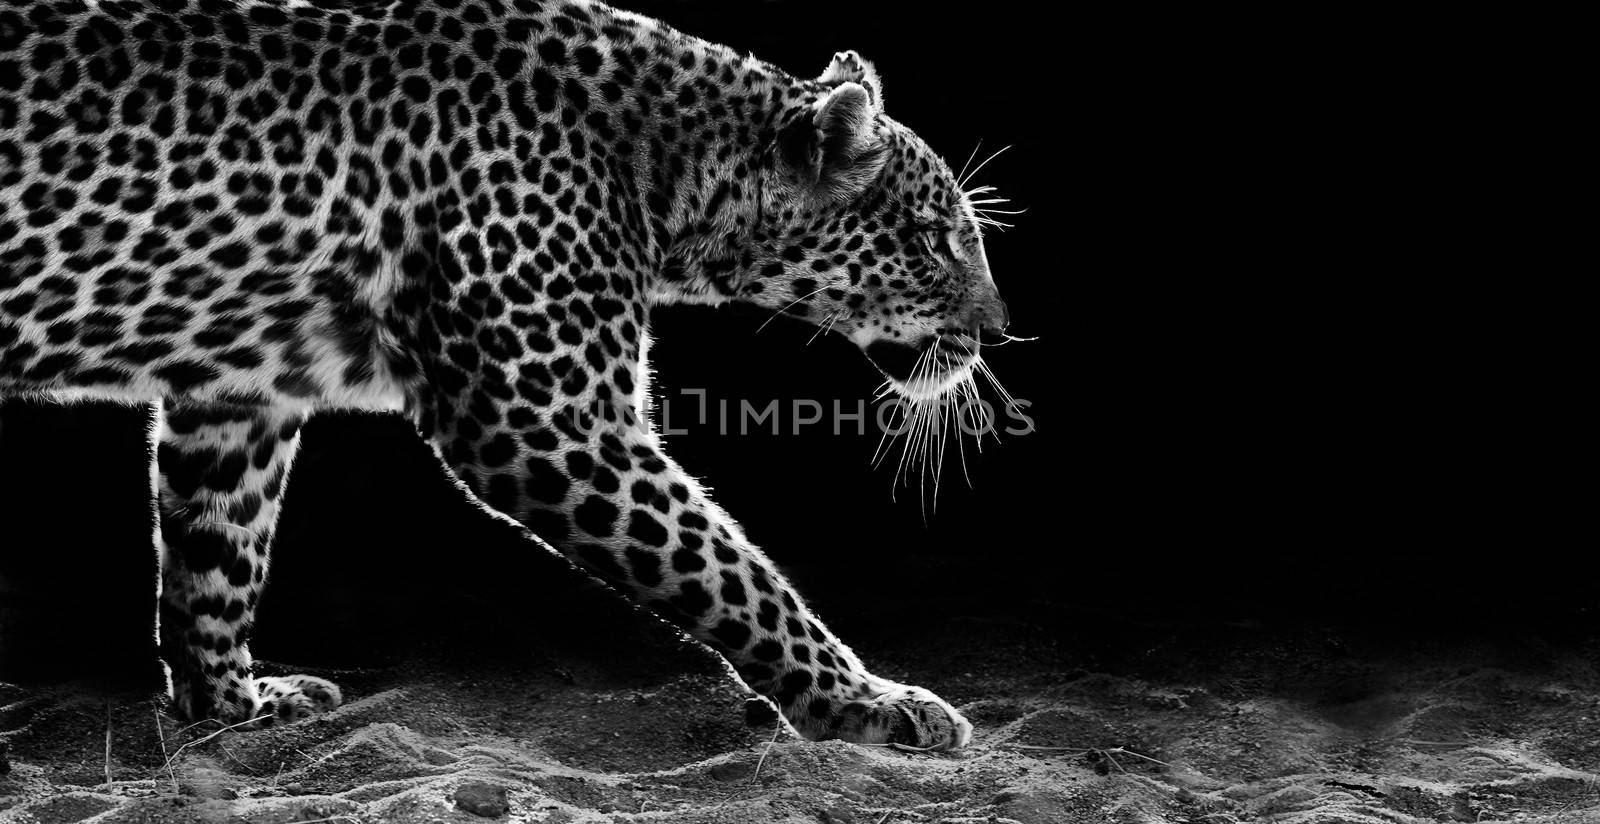 Black and white image of a leopard walking in the sand